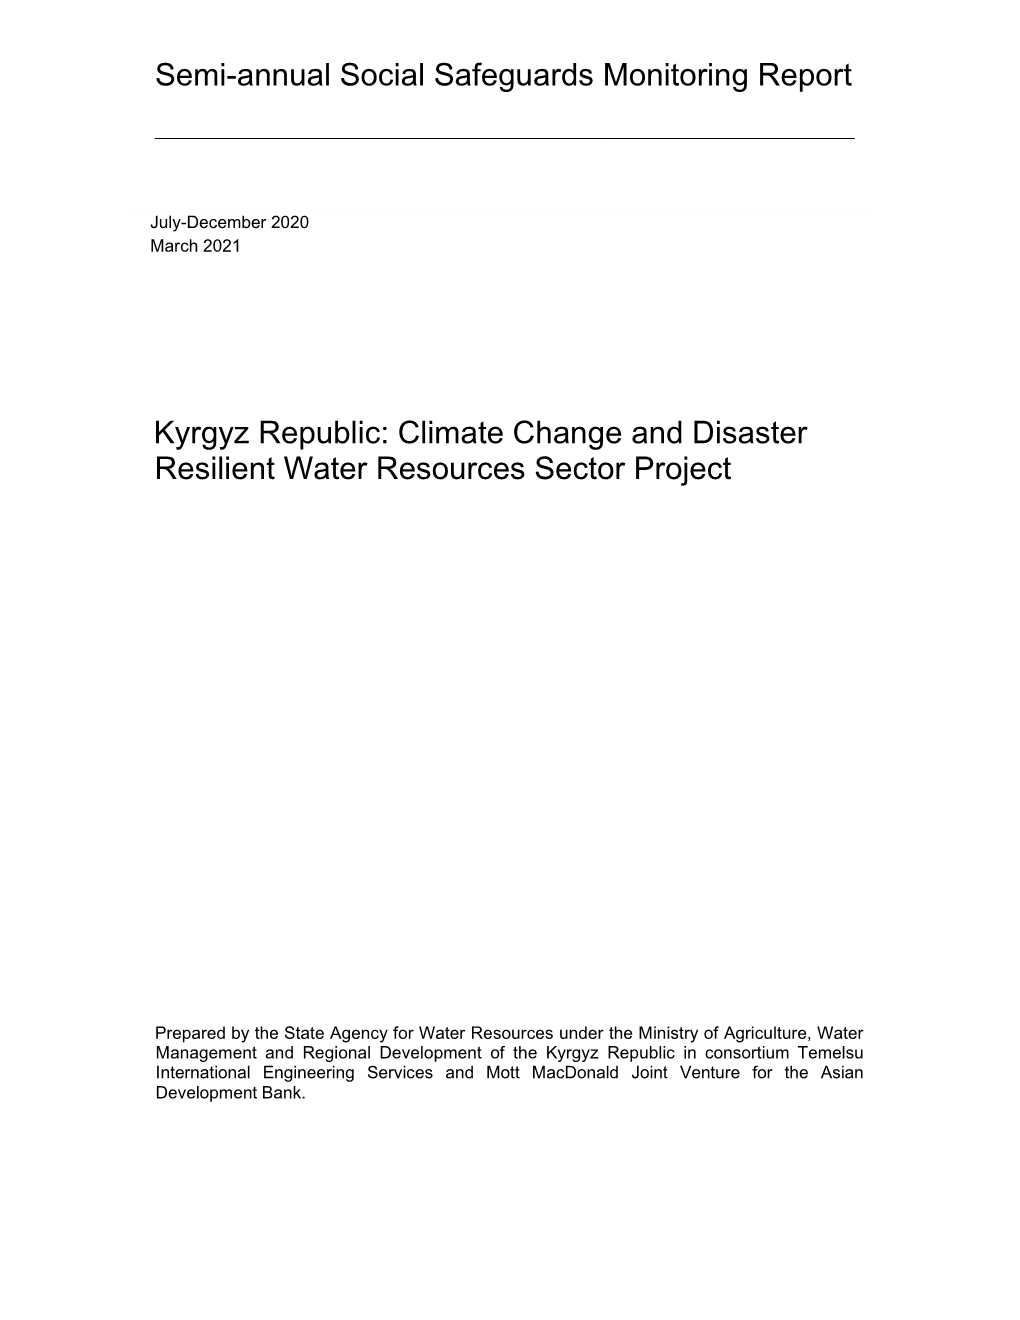 Climate Change and Disaster Resilient Water Resources Sector Project